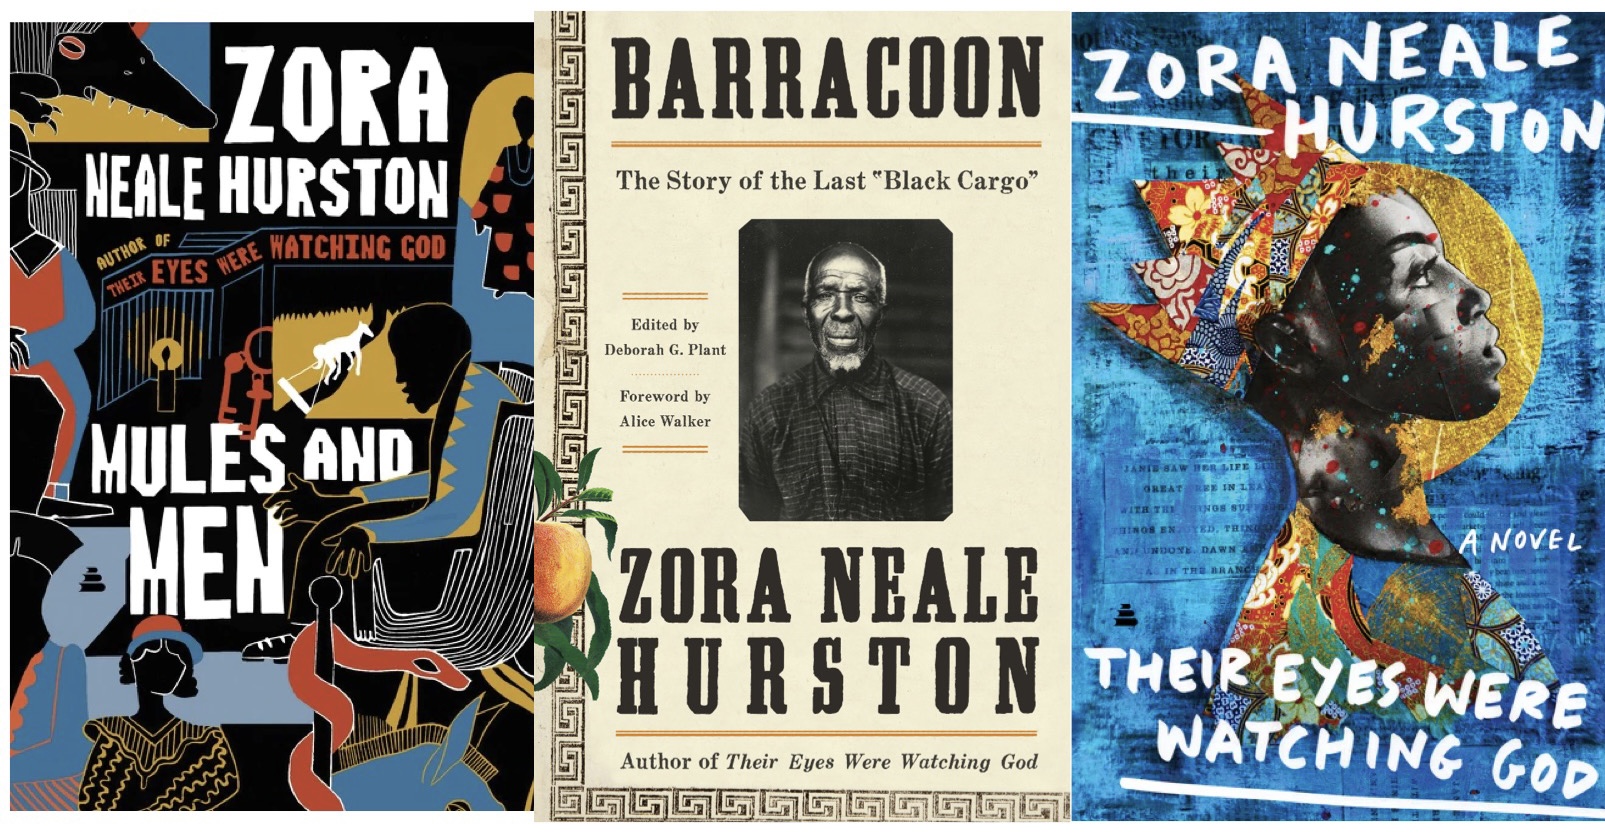 The genius and influential works of the amazing Zora Neale Hurston